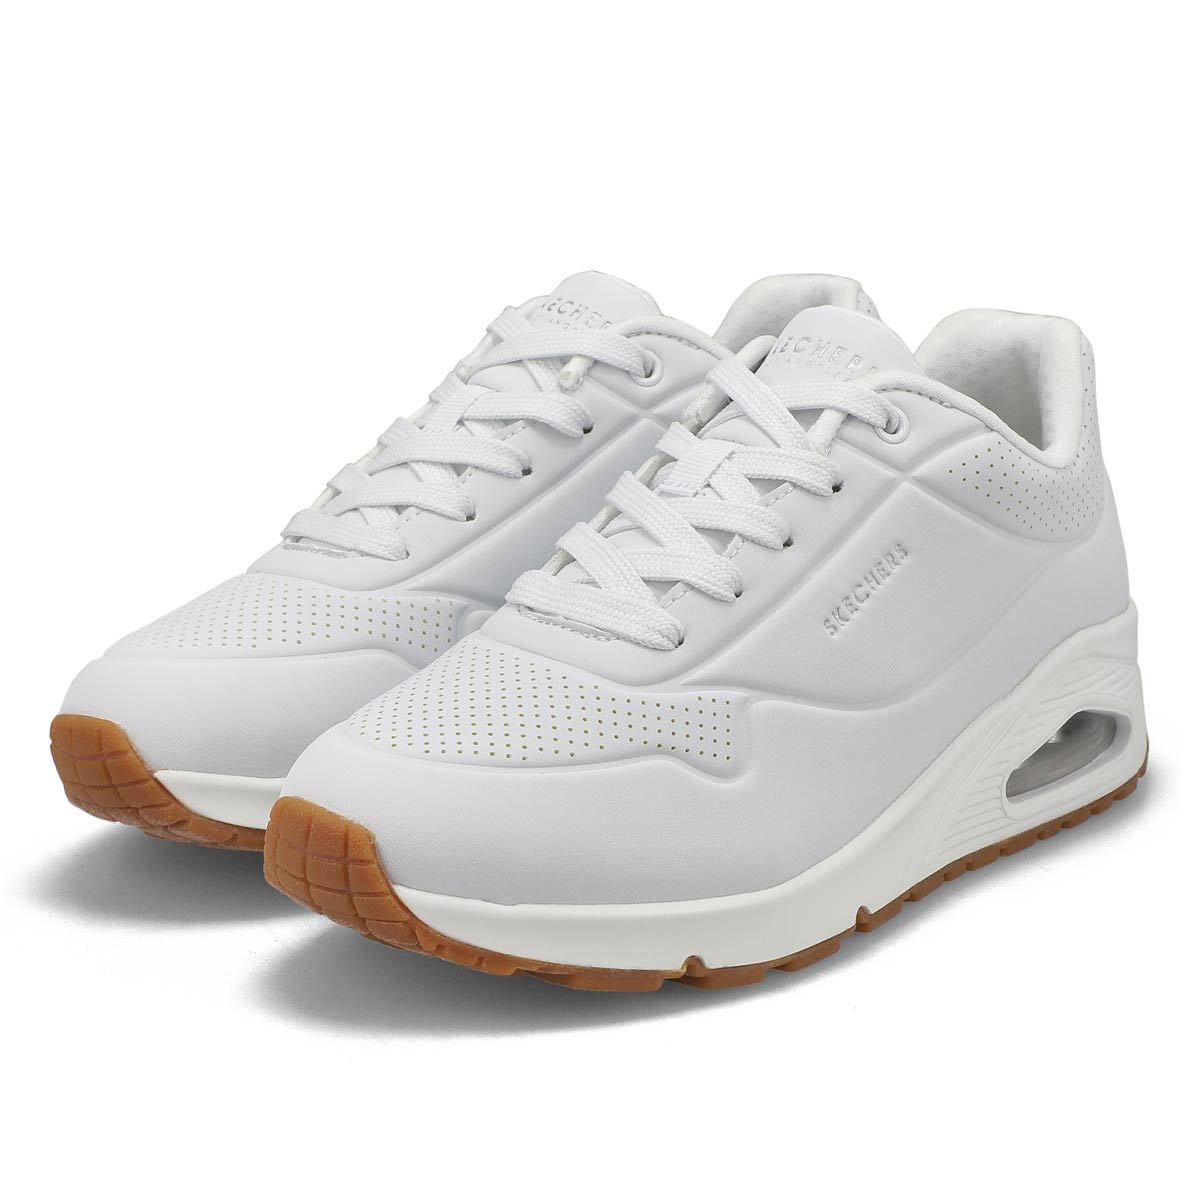 Women's Uno Stand On Air Wide Sneaker -White